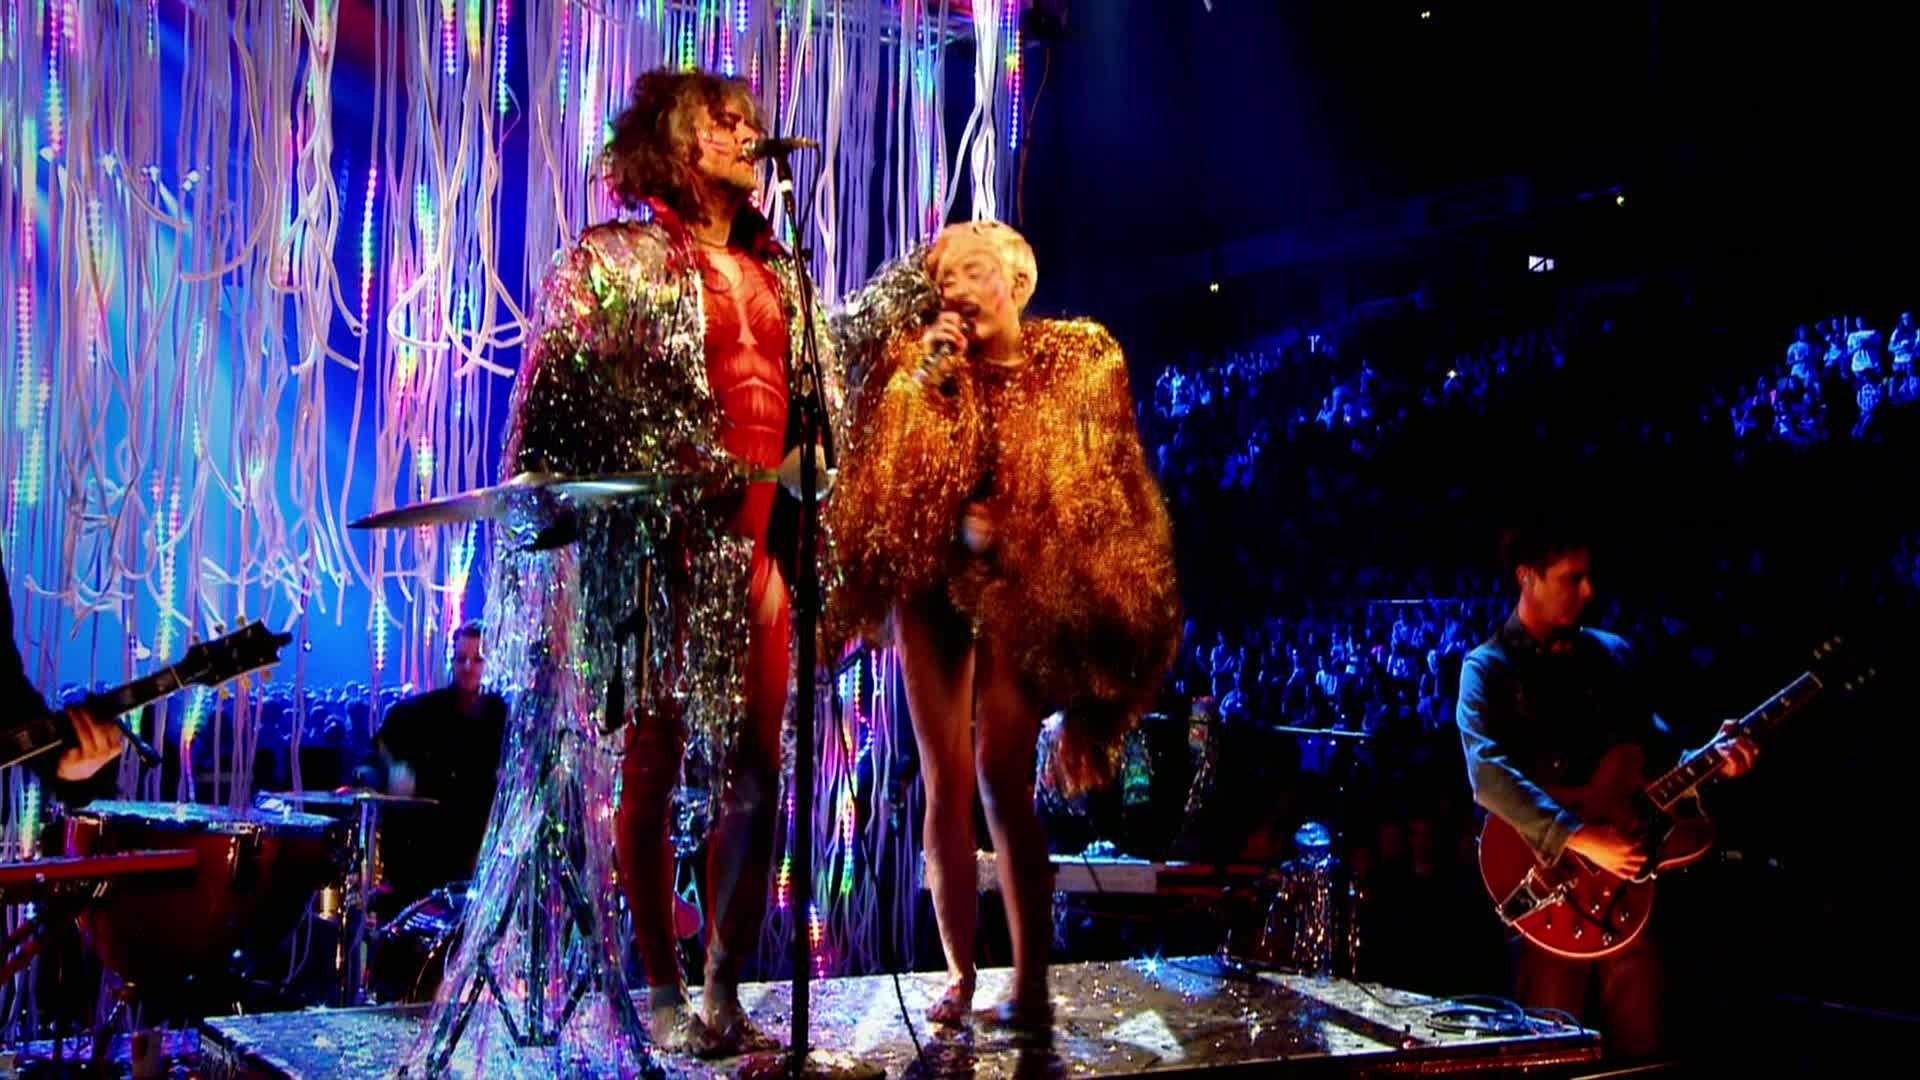 Miley Cyrus [ft The Flaming Lips] - 2014-05-18, Billboard Music Awards - 1080 TS - LSD preview 14